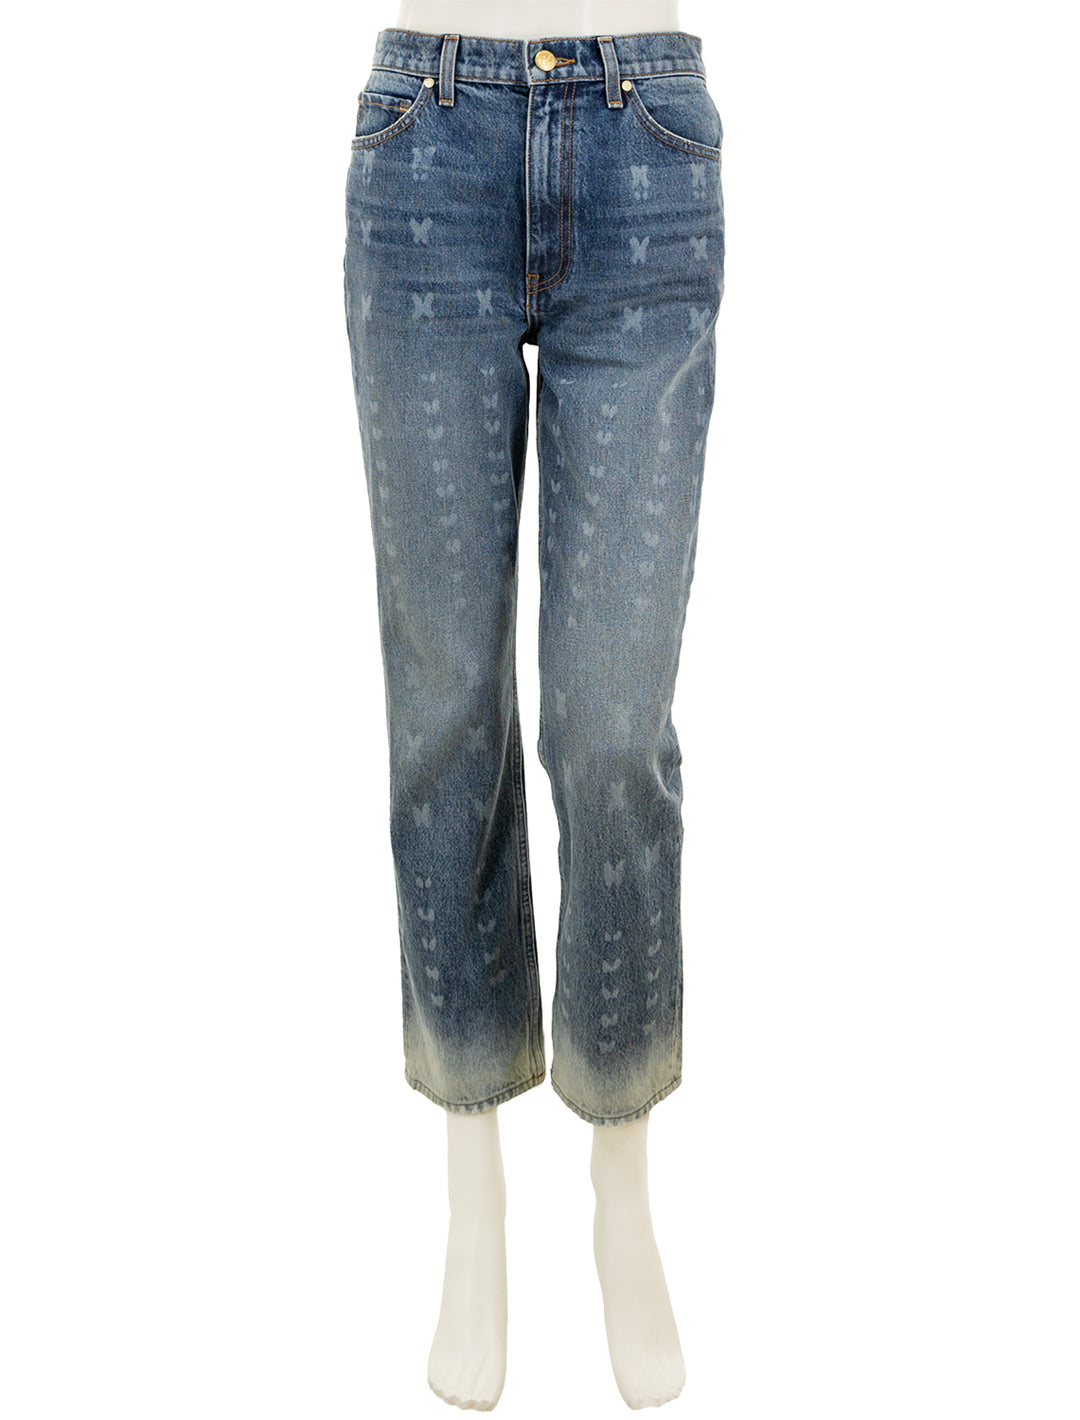 Front view of Ulla Johnson's the cropped agnes jean in etched arashi wash.